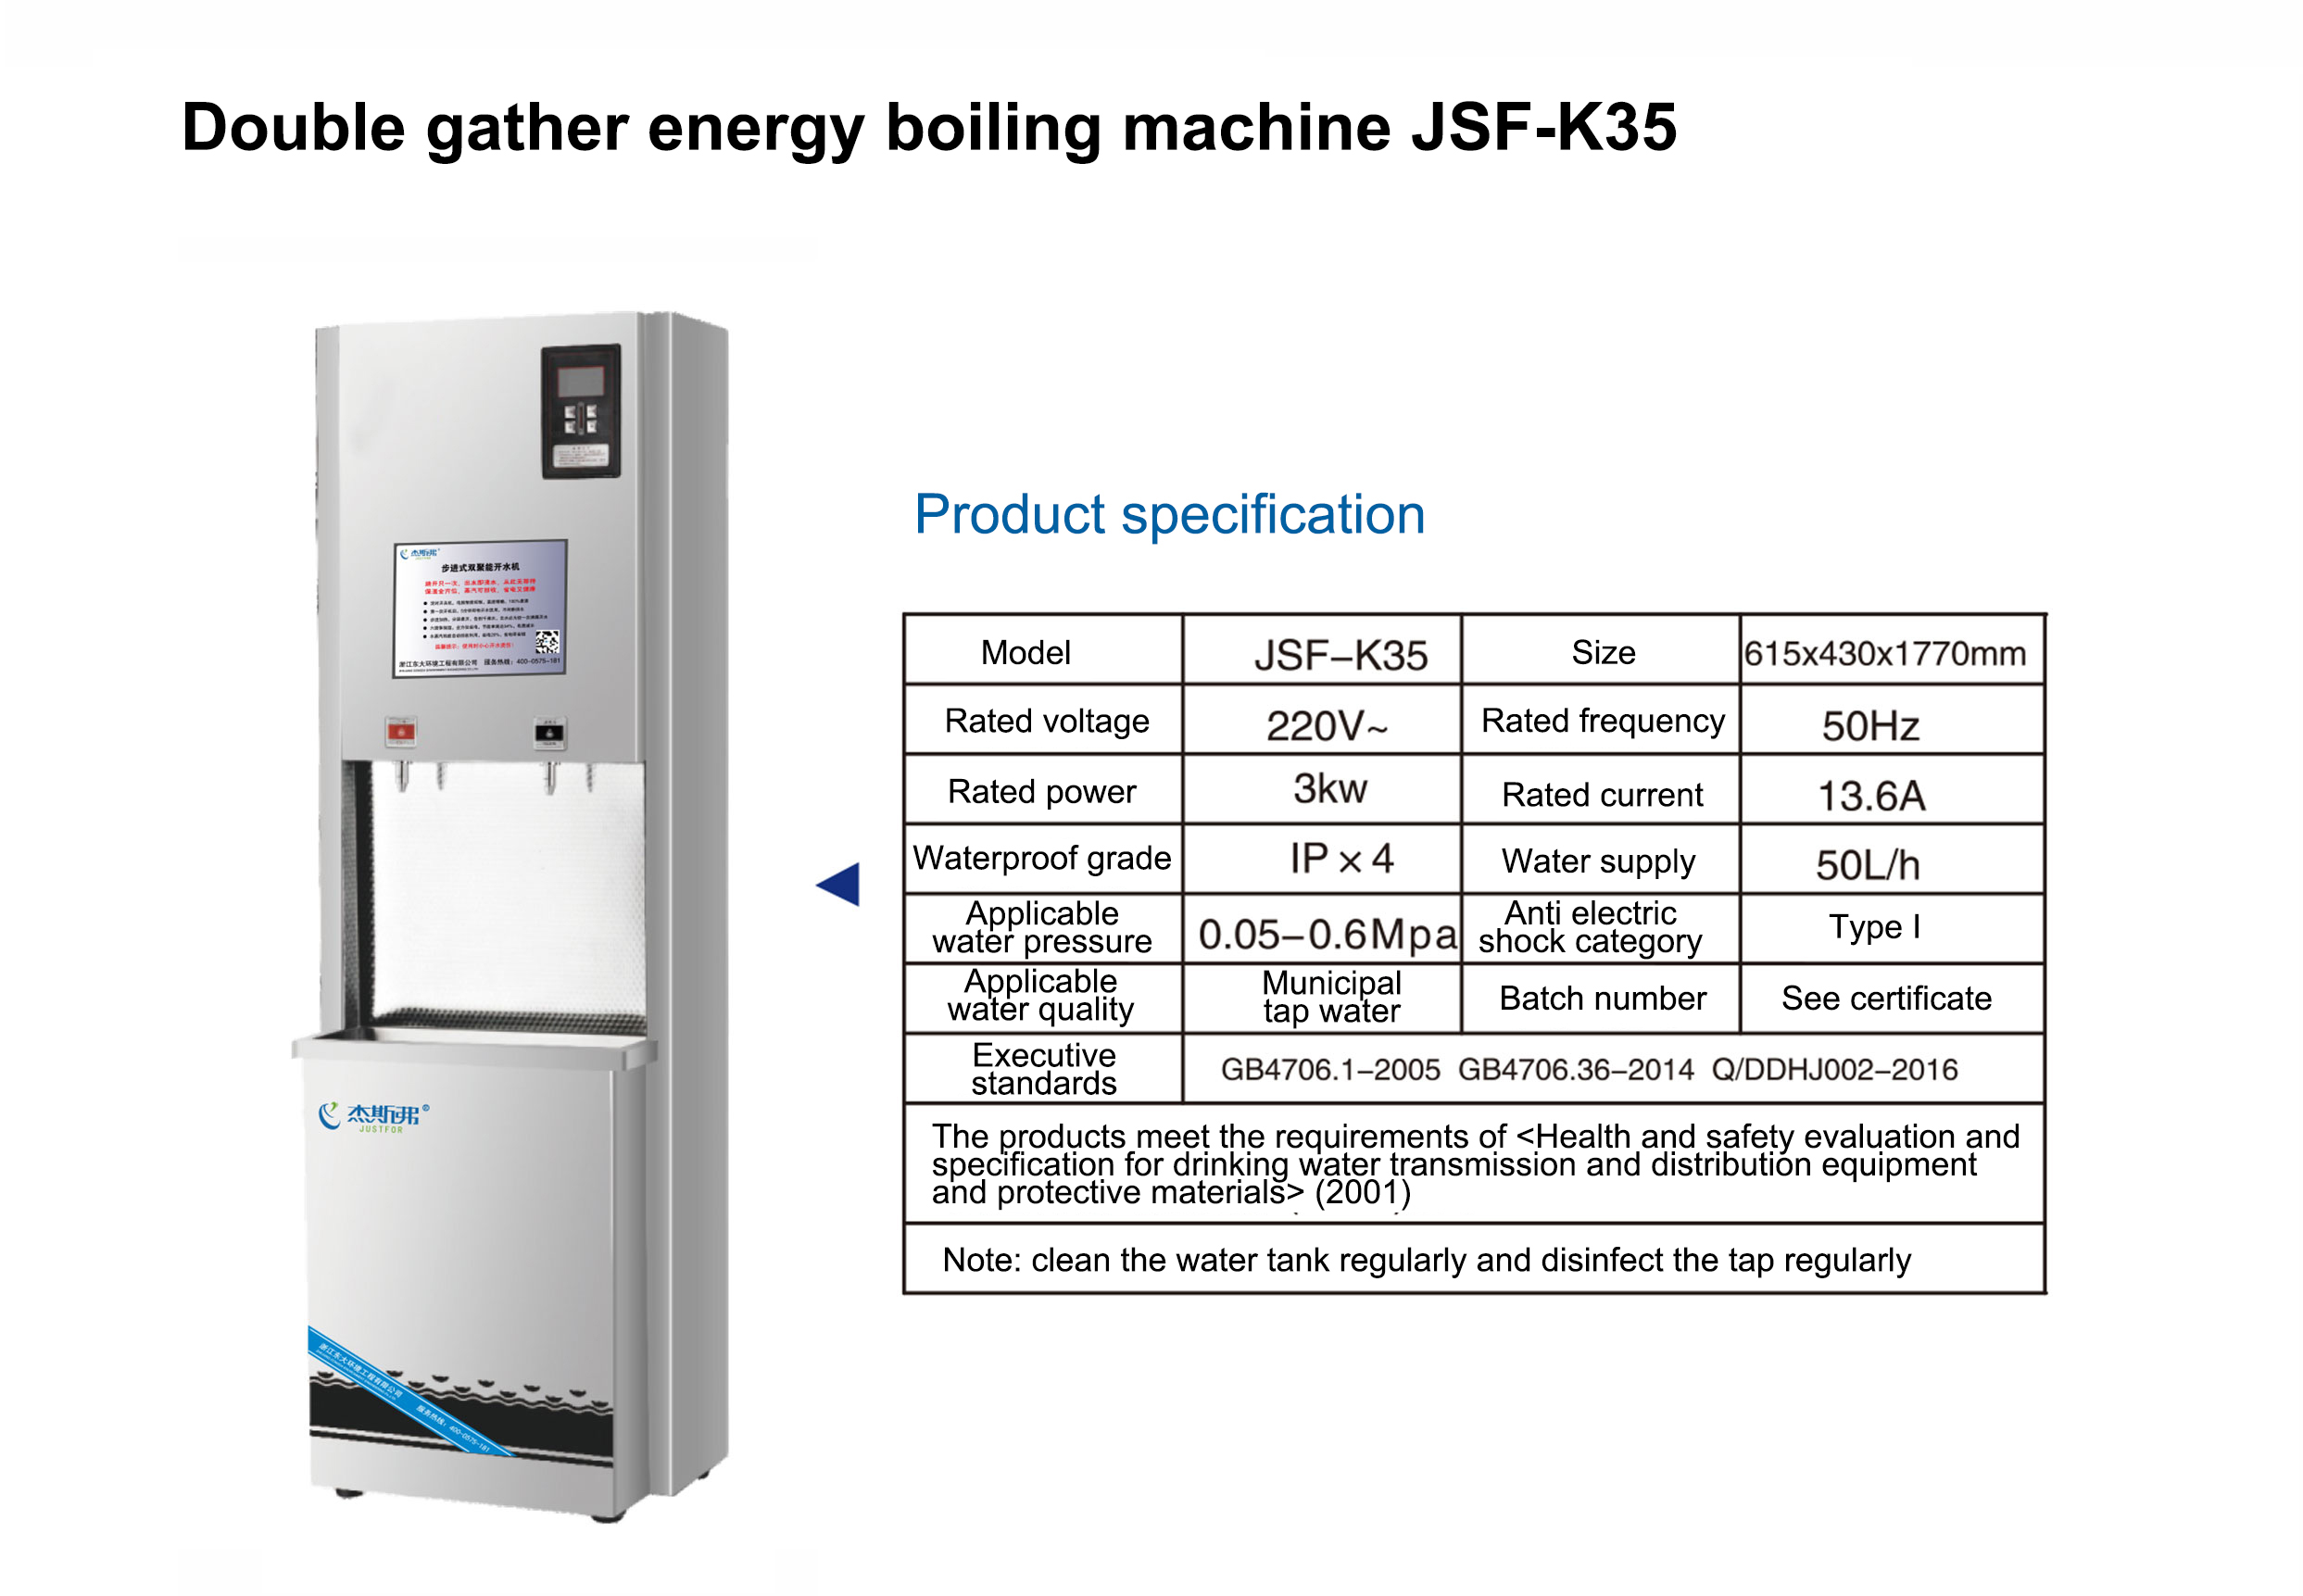 Double gather energy boiling machine（JSF-K35）